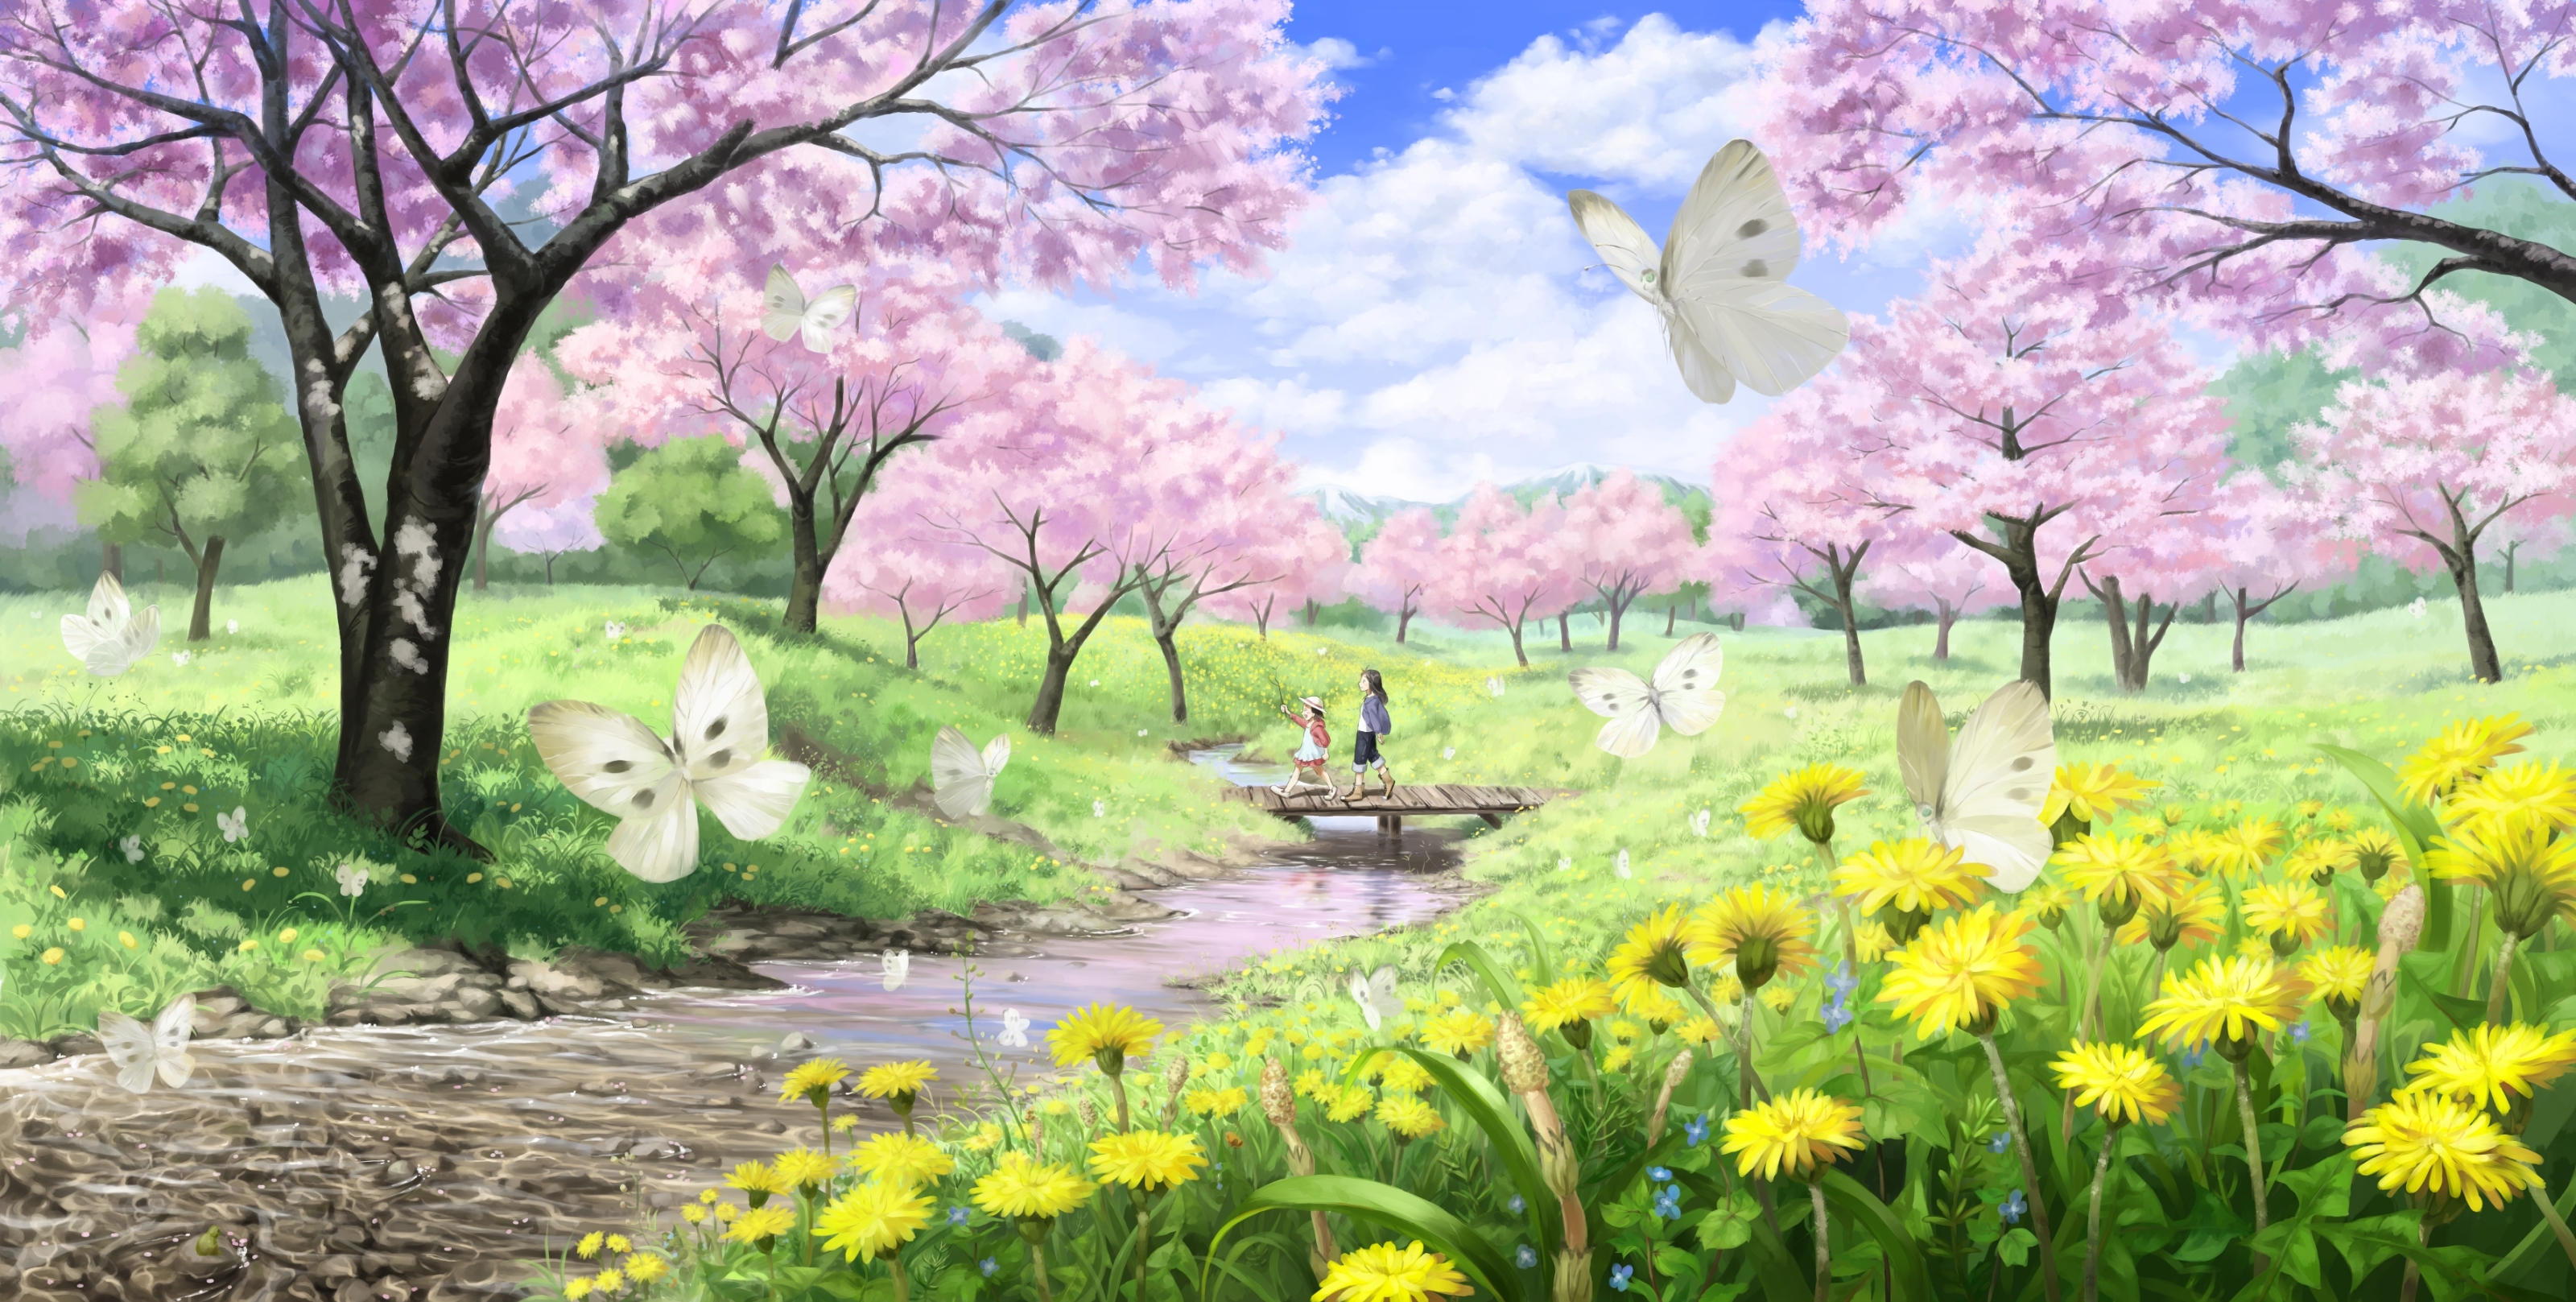 Is Under The Spring Wallpaper Category Of HD